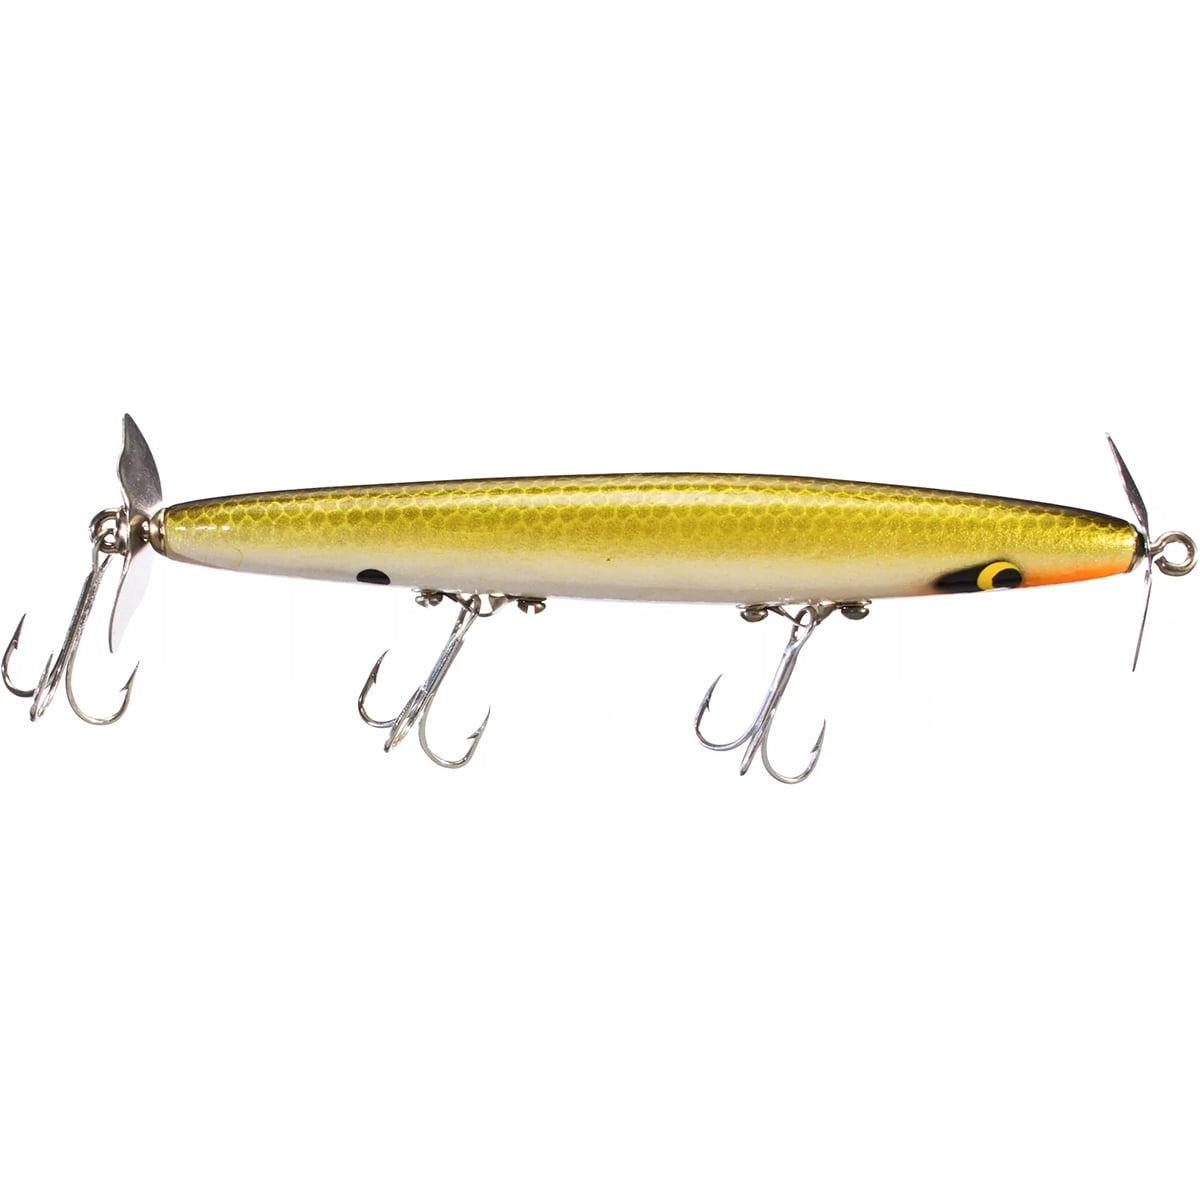 Smithwick Devils Horse 1/2 oz Surface Fishing Lure - Tennessee Shad